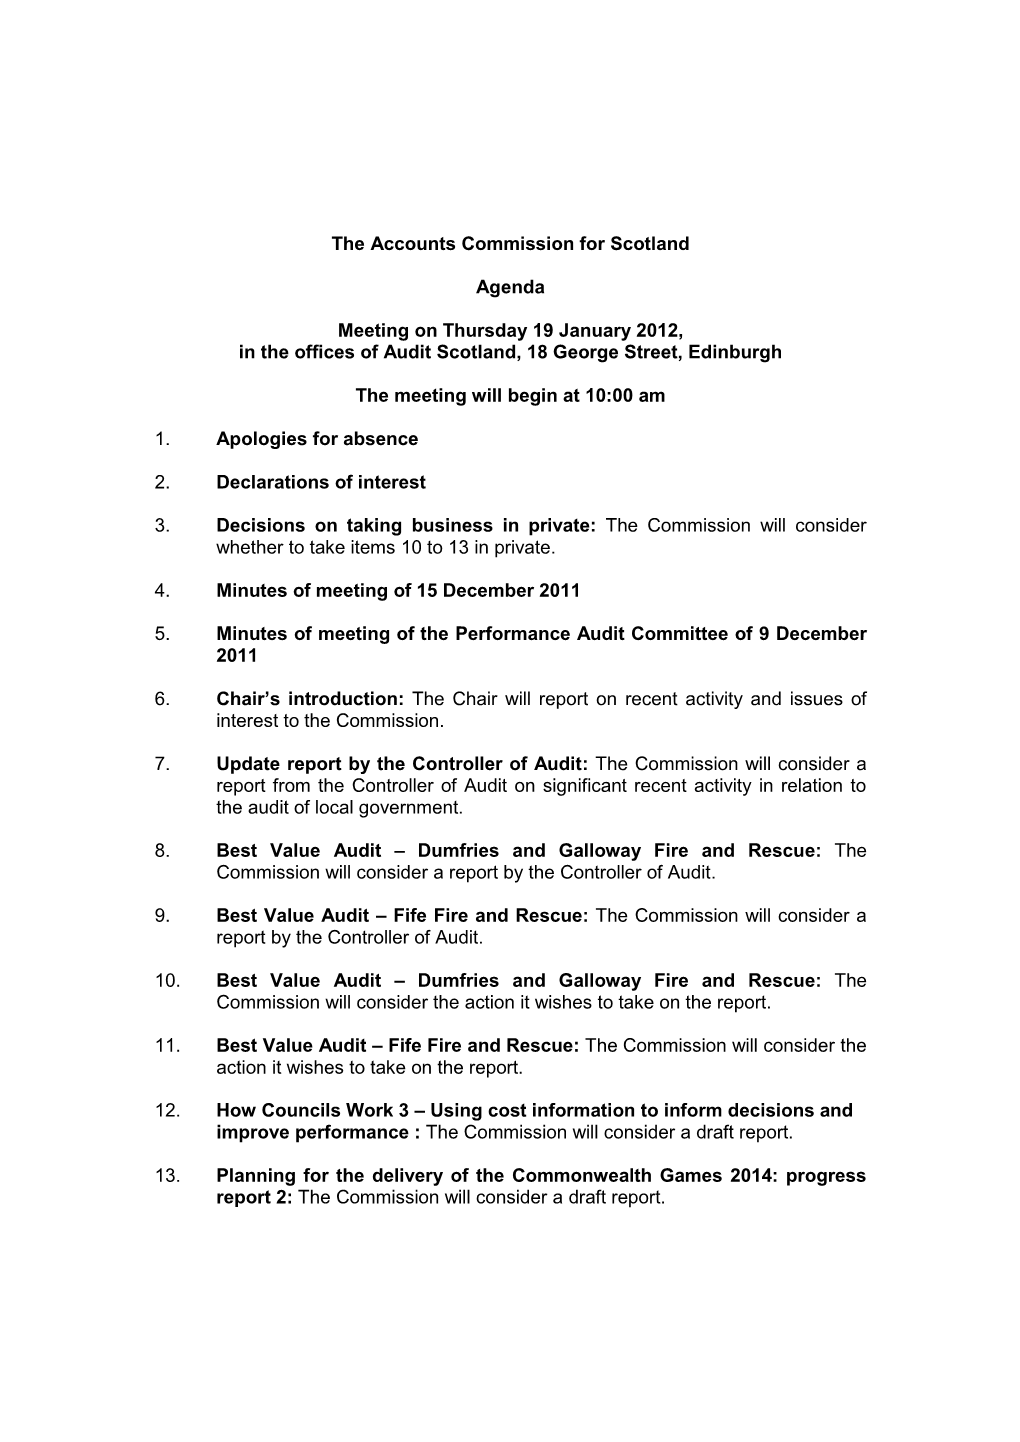 Agenda for the Meeting of the Accounts Commission